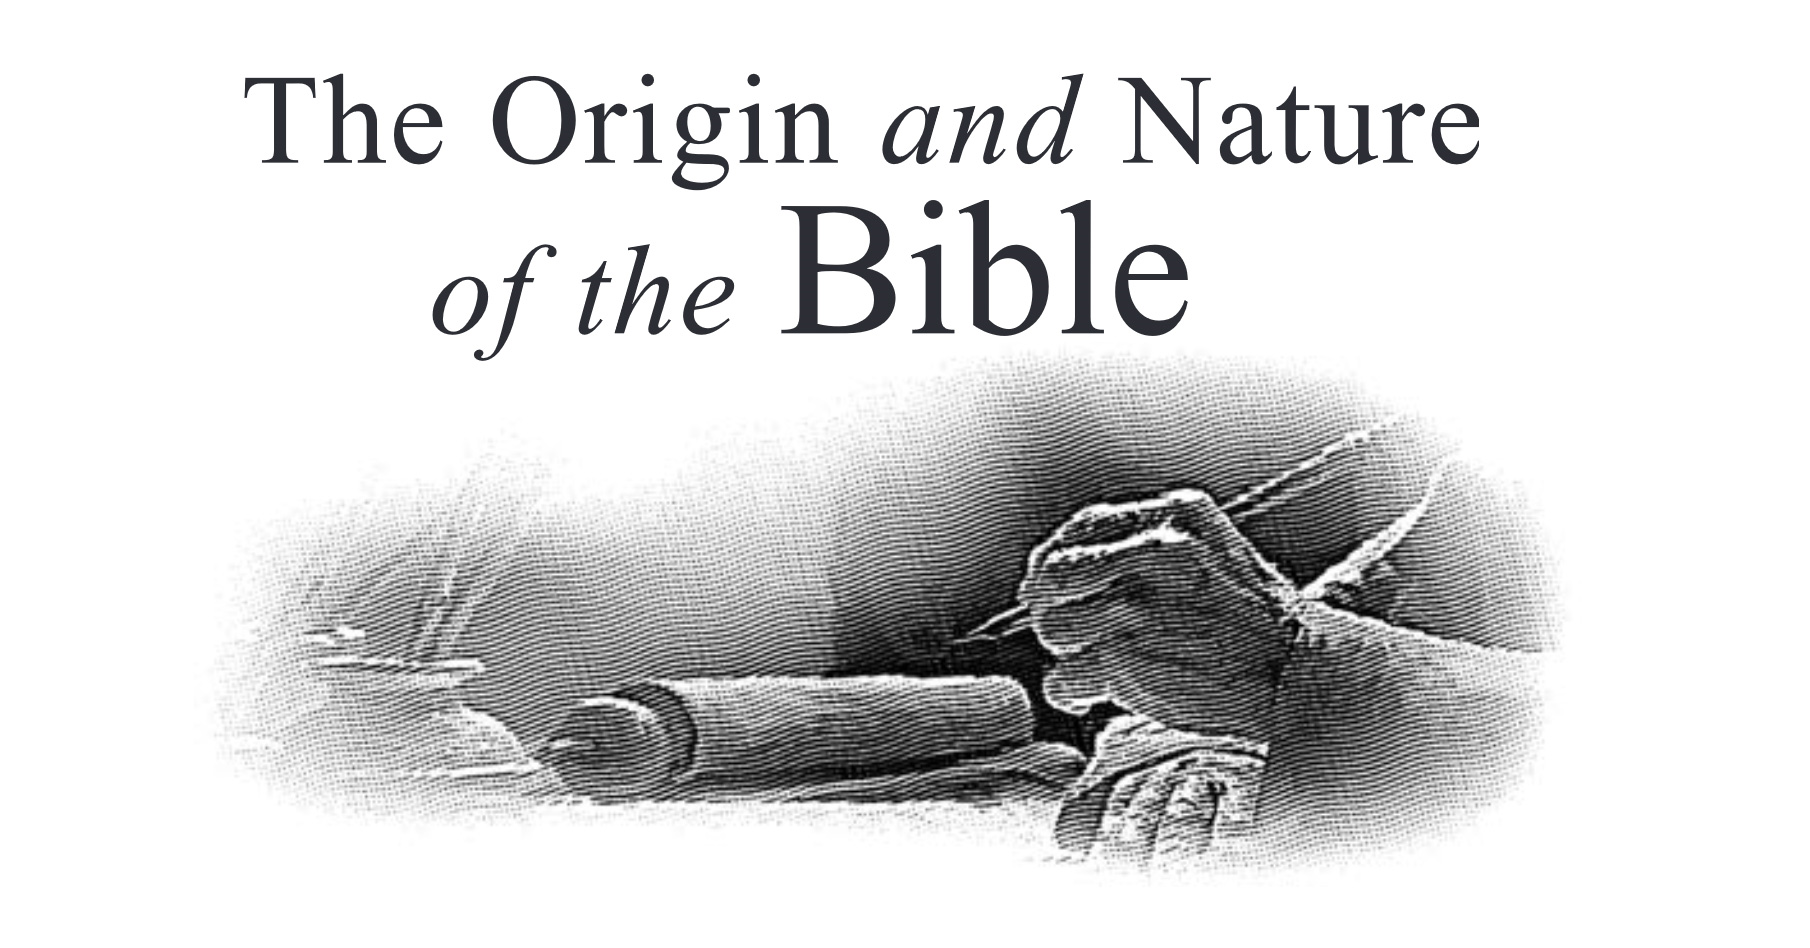 The Origin and Nature of the Bible